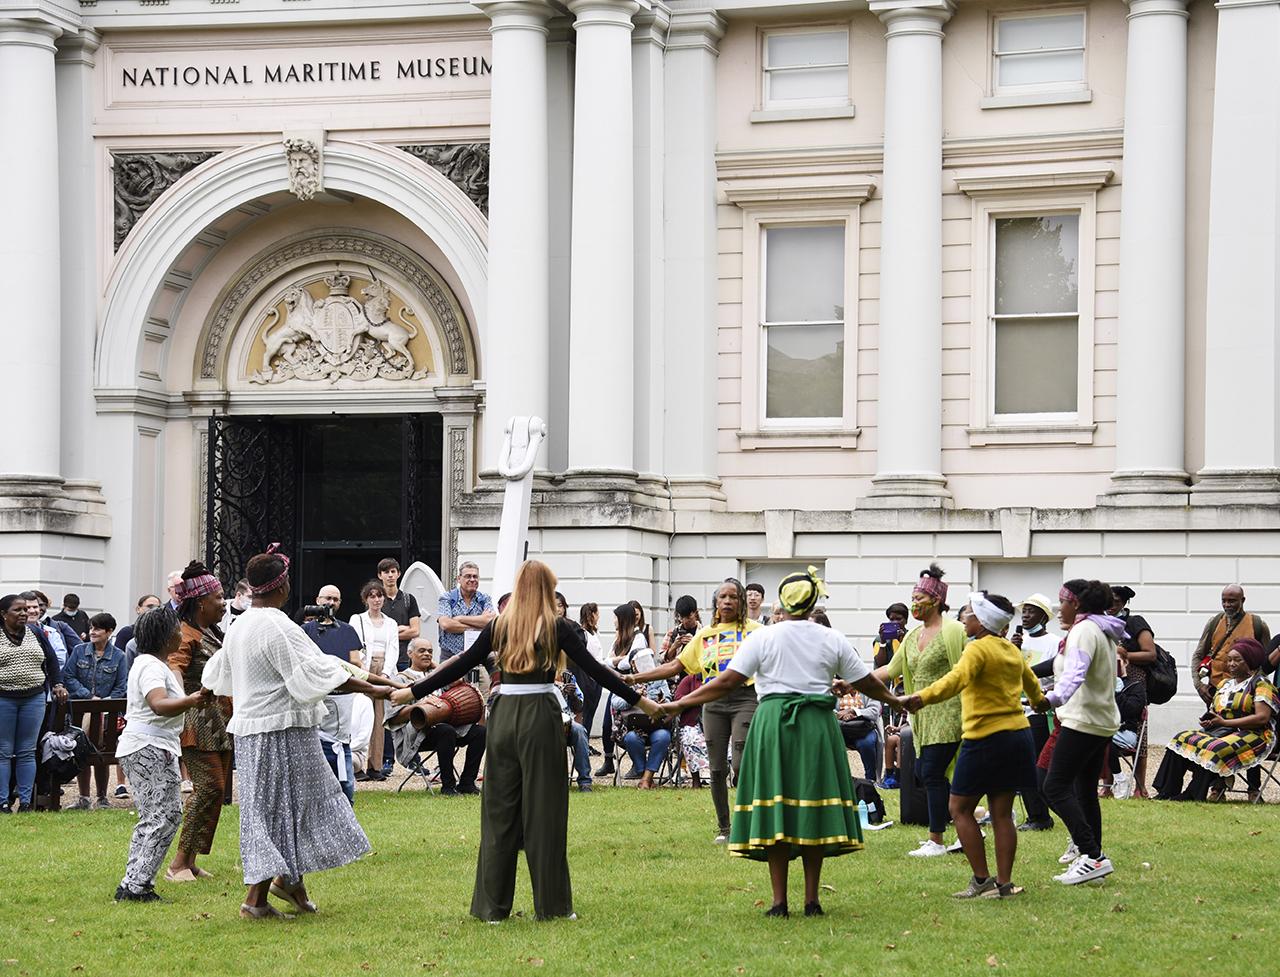 An image showing 'People dancing outside the National Maritime Museum'